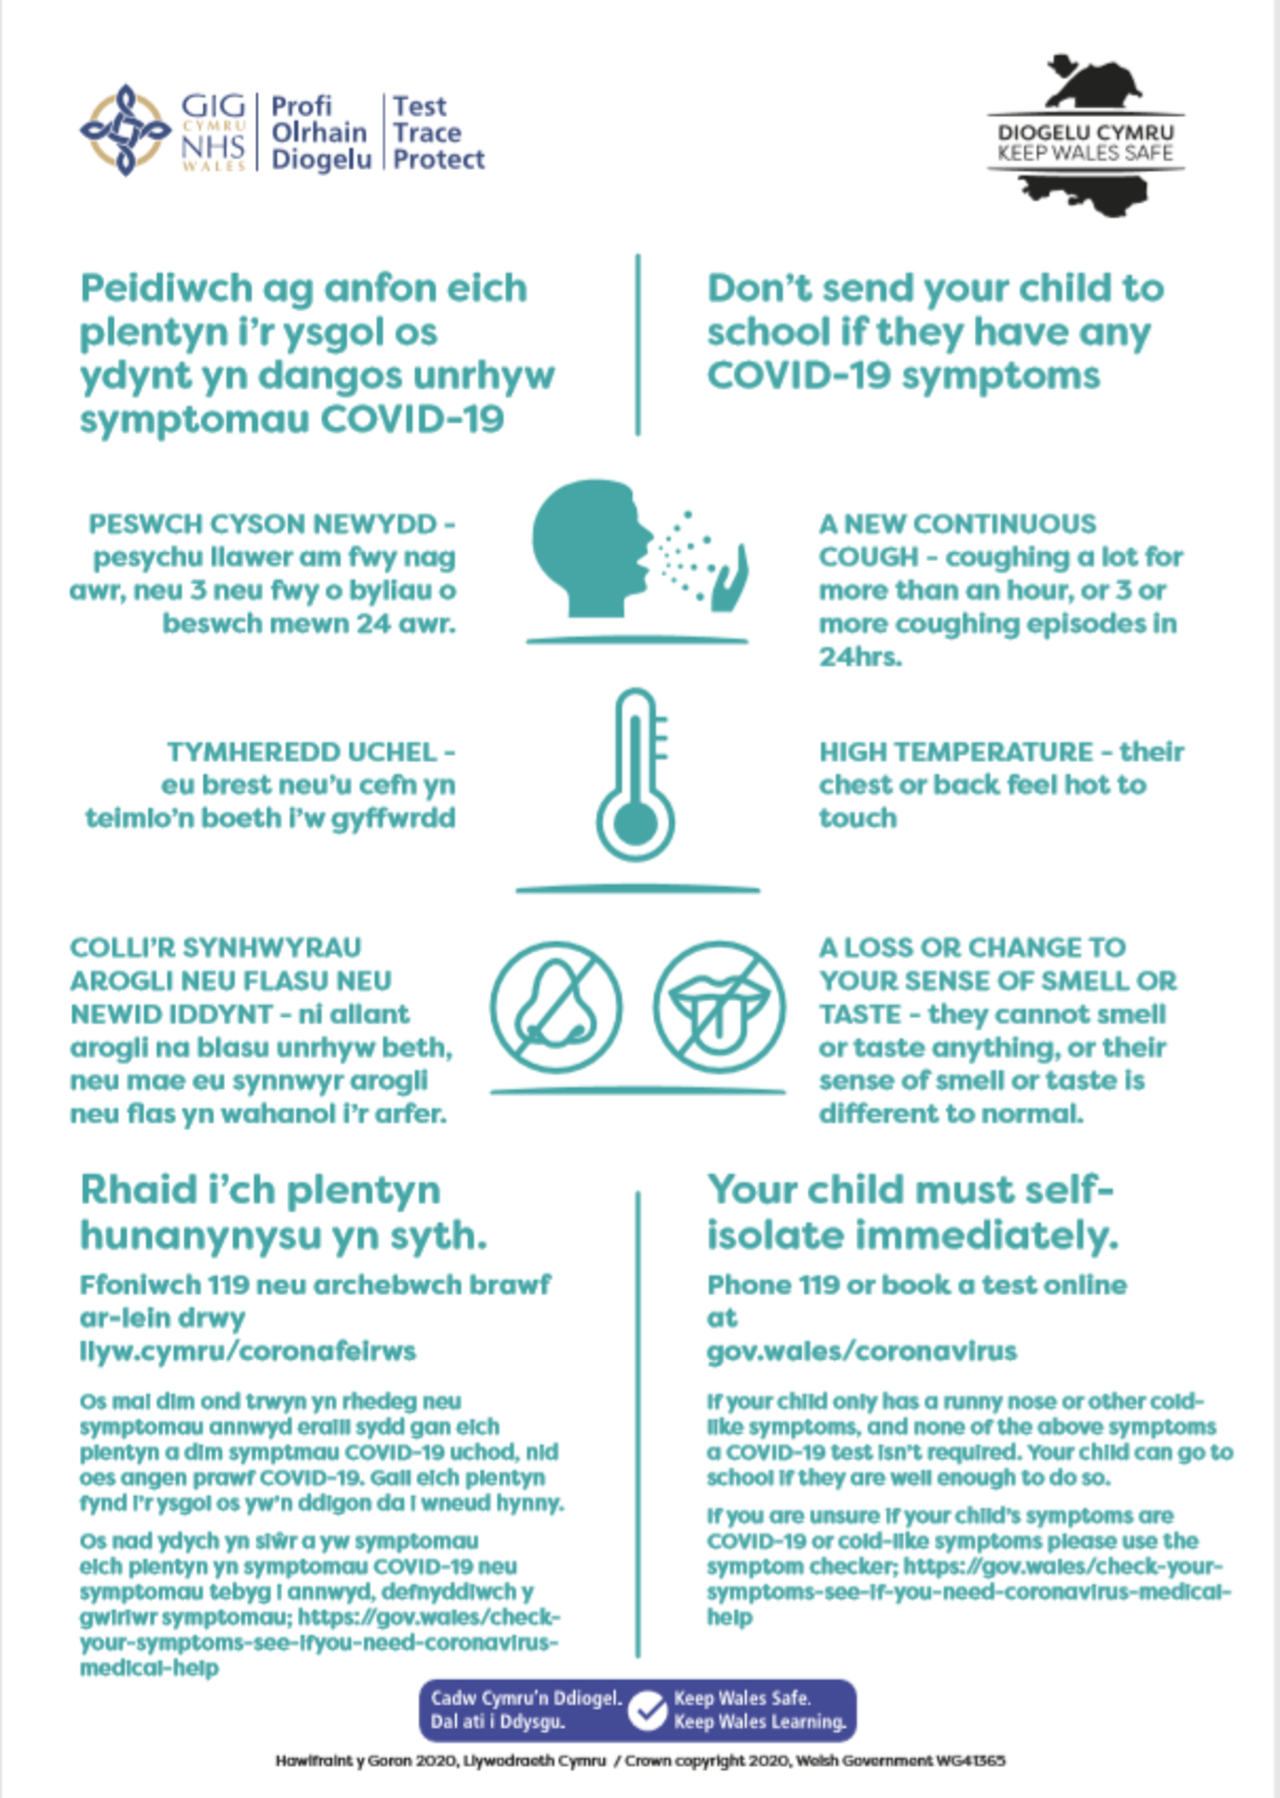 Don't Send Your Child to School if They Have Any COVID-19 Symptoms